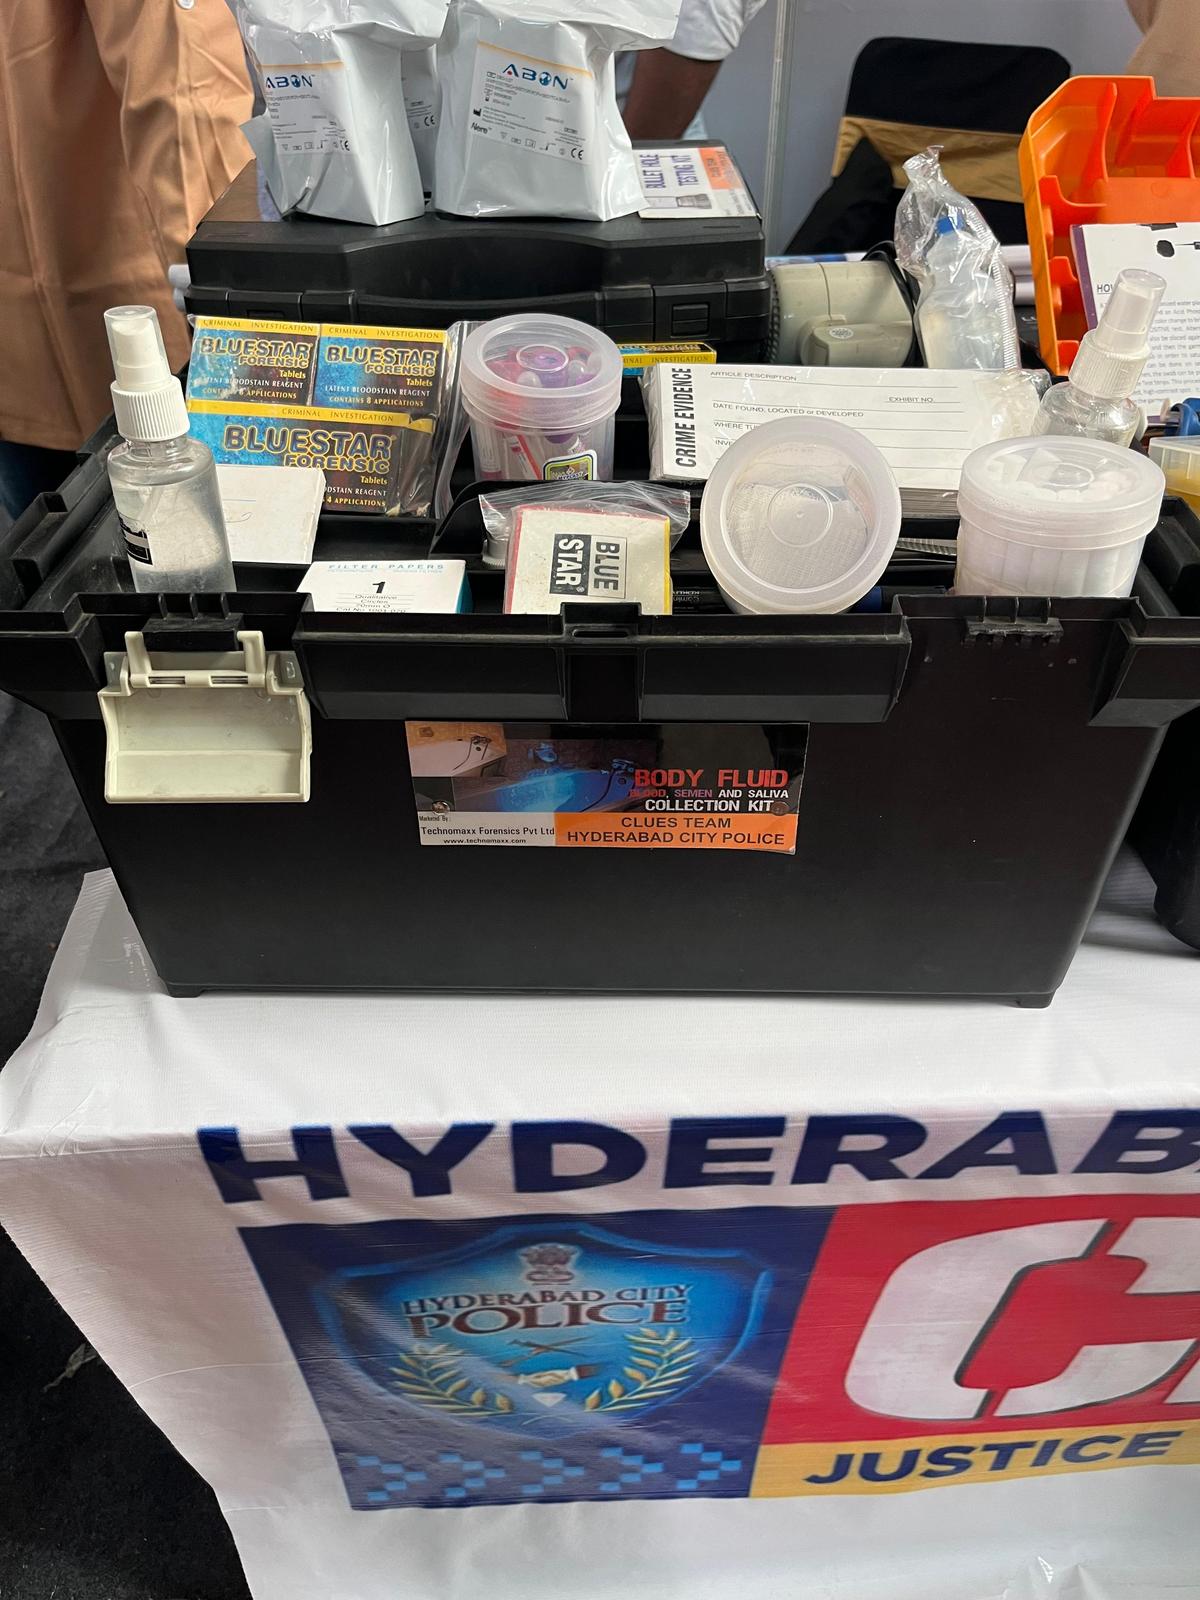 Body fluid (blood, semen and saliva) collection kit used by Hyderabad city police clues team, which comes under Telangana Forensic Science Laboratory. TGFSL has spent over ₹18 crore to place an order of 29 mobile forensic labs which will be fully equipped and manned by a forensic expert to perform tests on the crime scene.